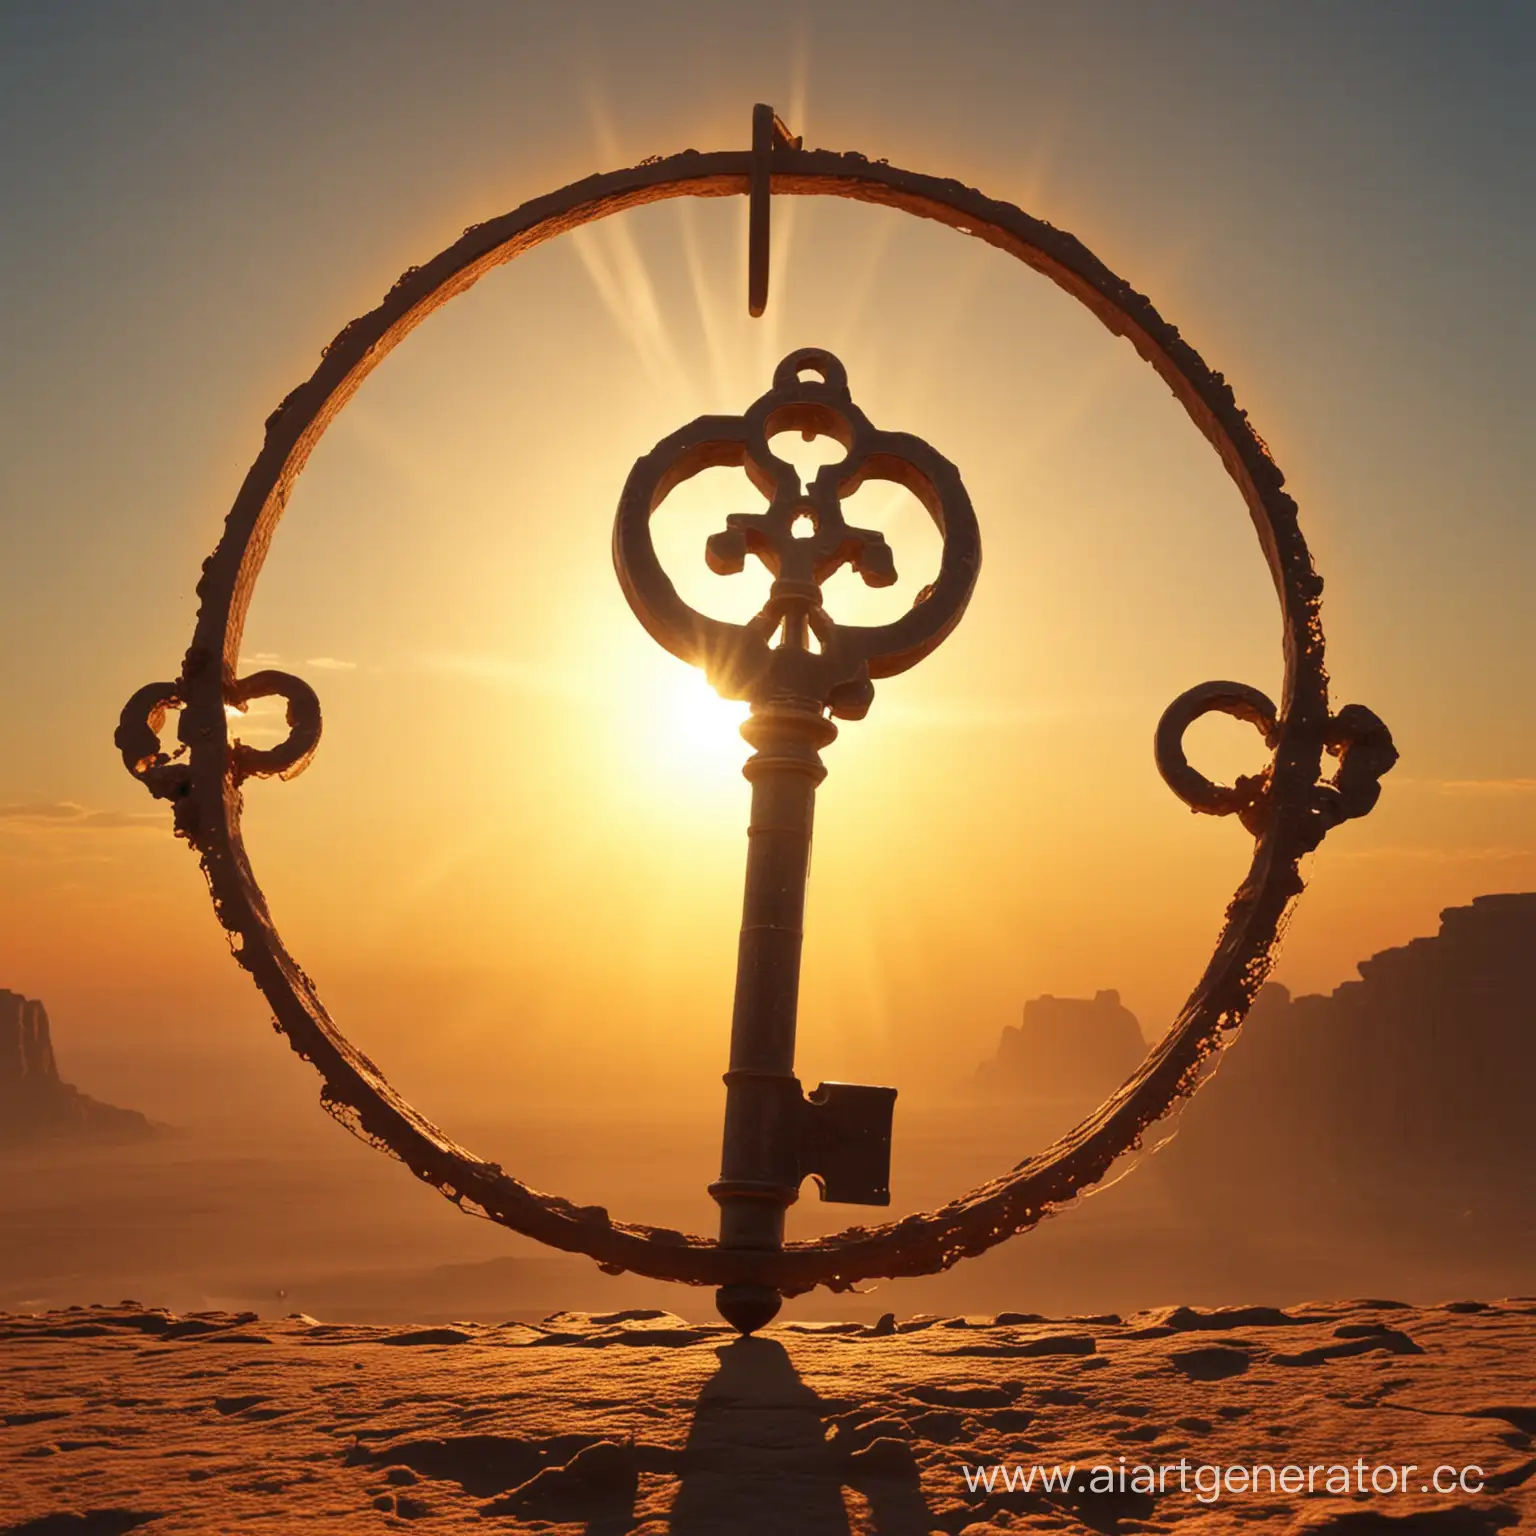 Majestic-Ancient-Key-Shining-Against-Glowing-Sun-Disk